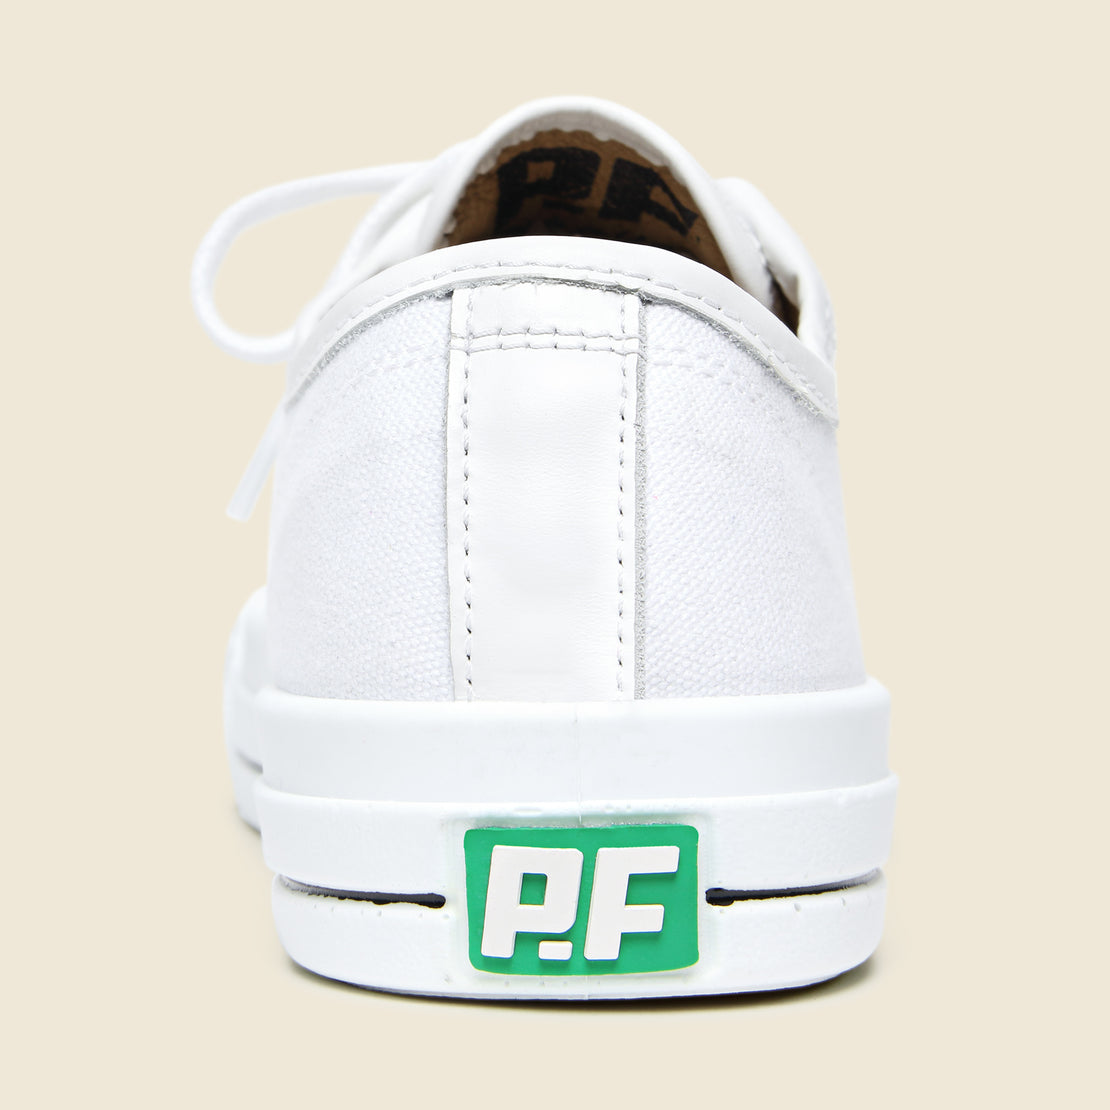 USA Center Lo-Top - White - PF Flyers - STAG Provisions - W - Shoes - Sneakers